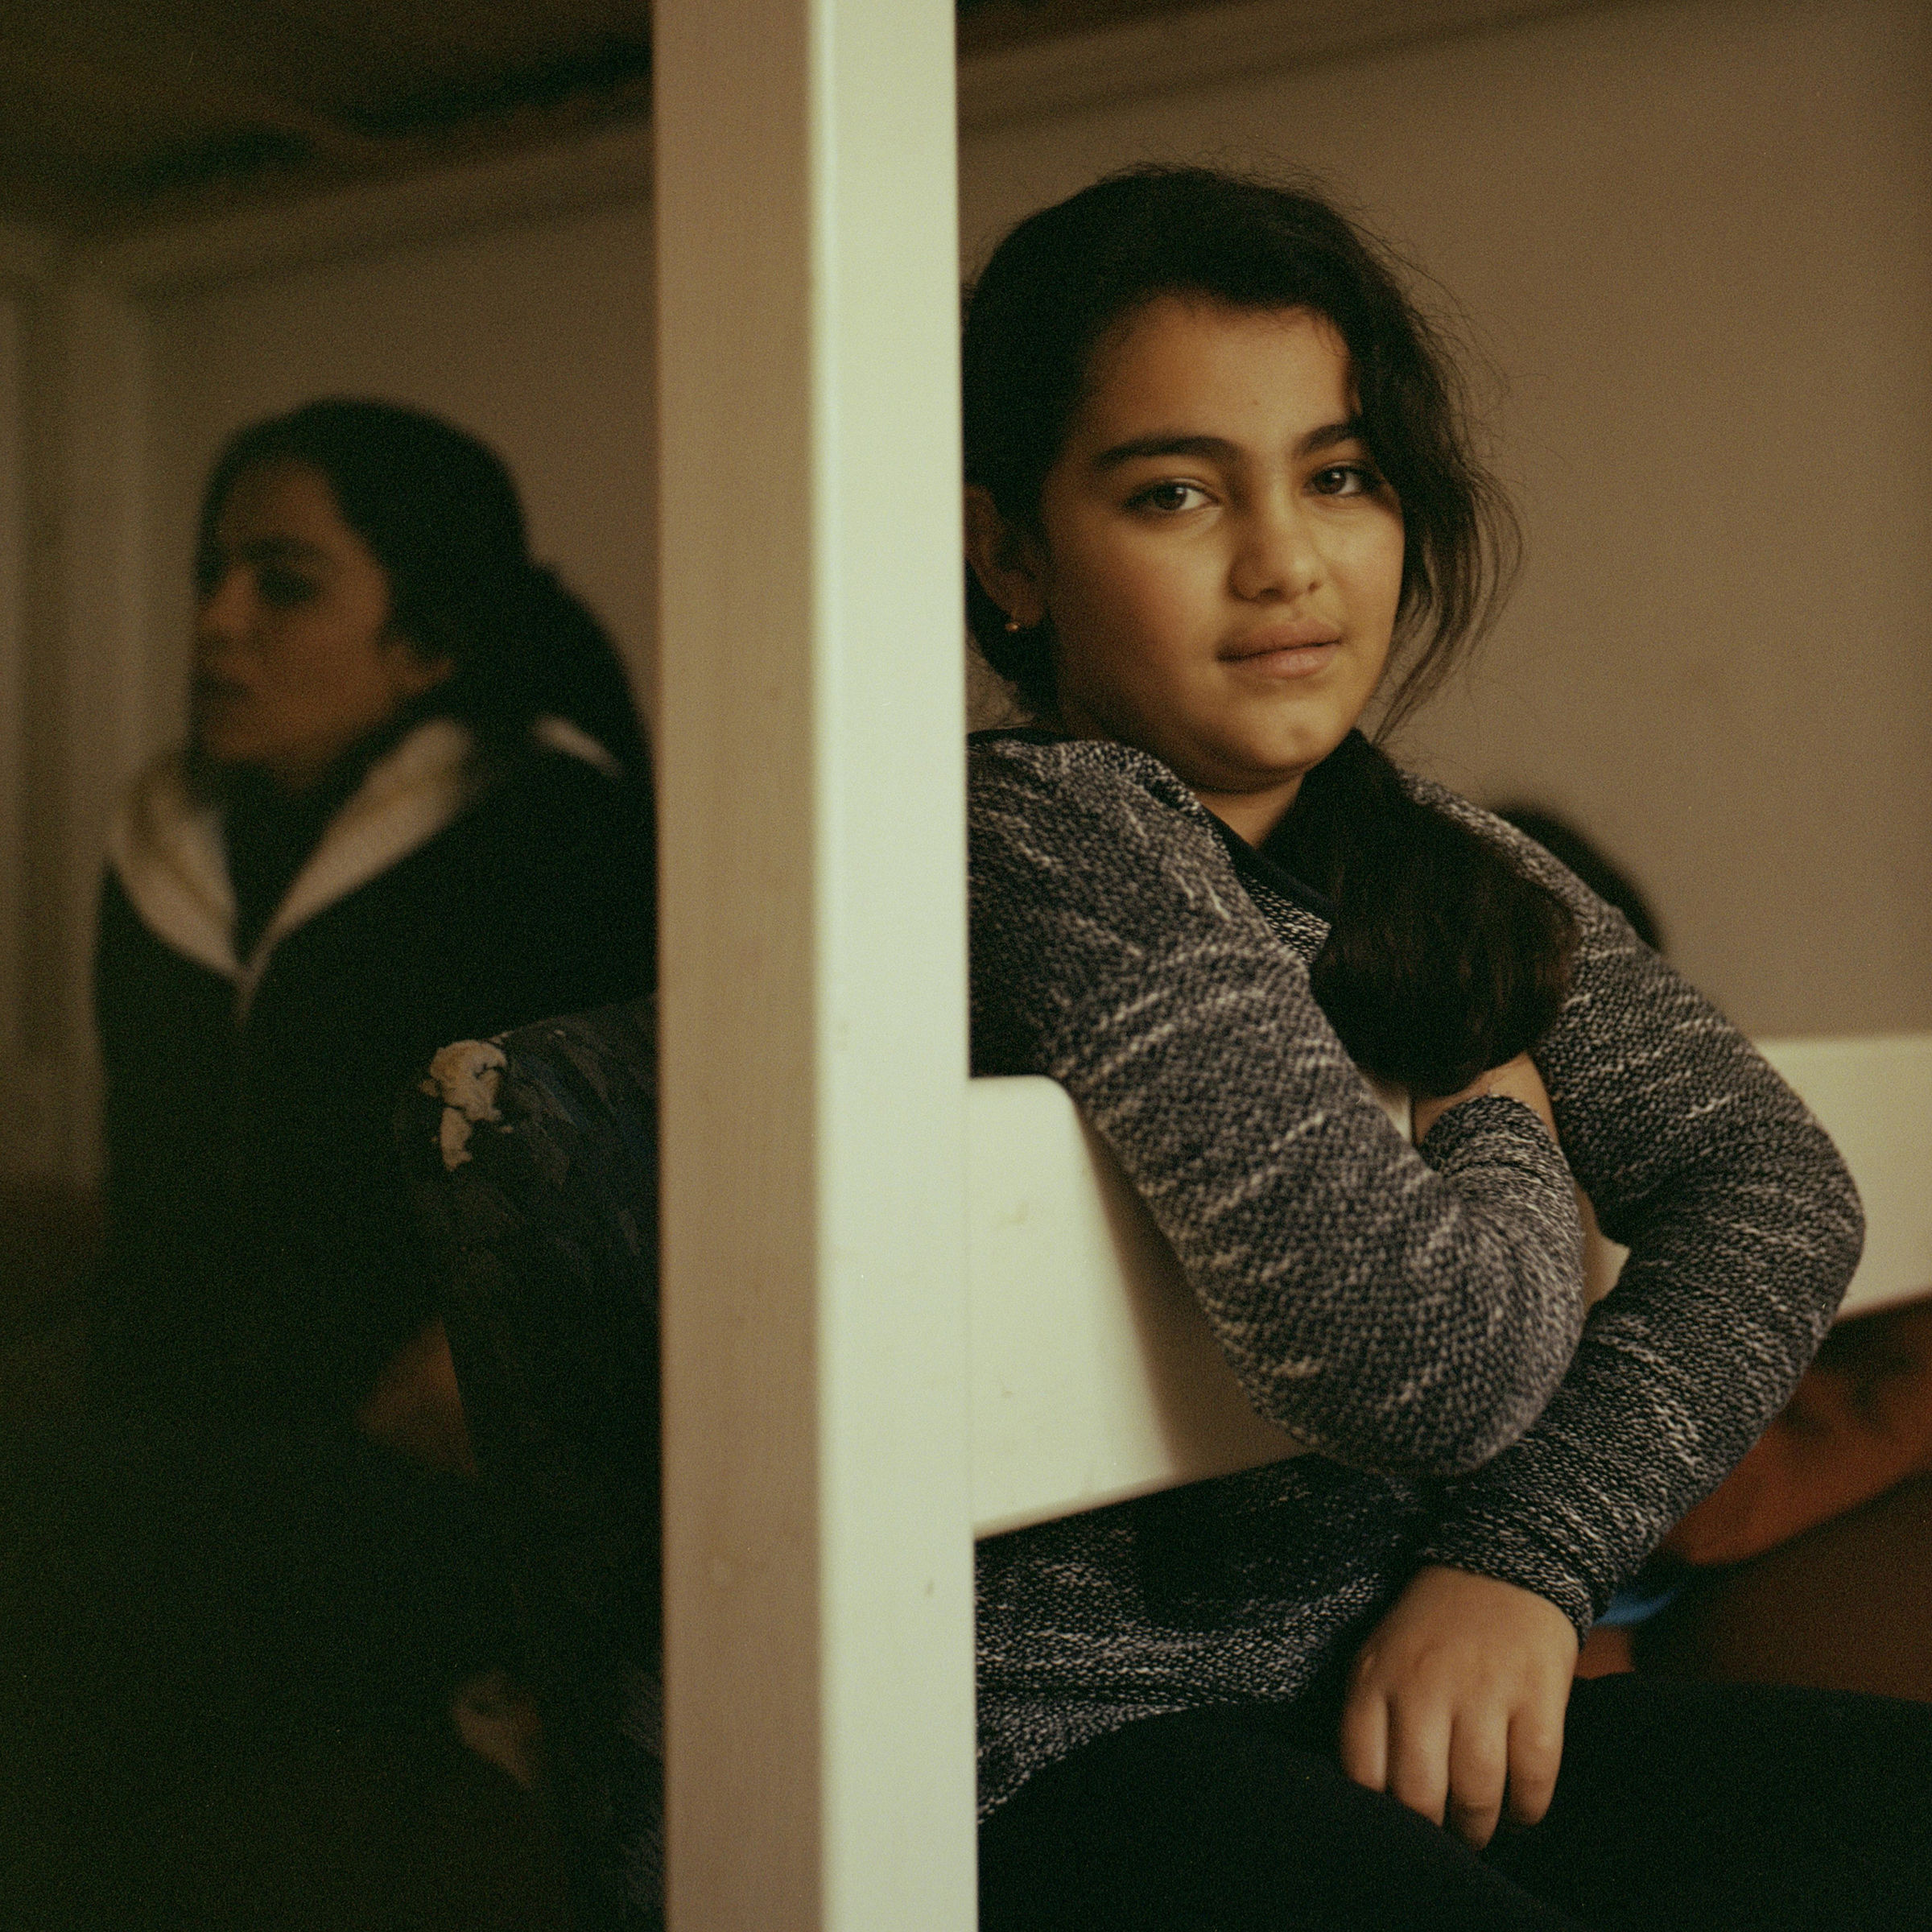 Berivan, Hanan's 10-year-old daughter, at home. (Tori Ferenc—INSTITUTE for TIME)